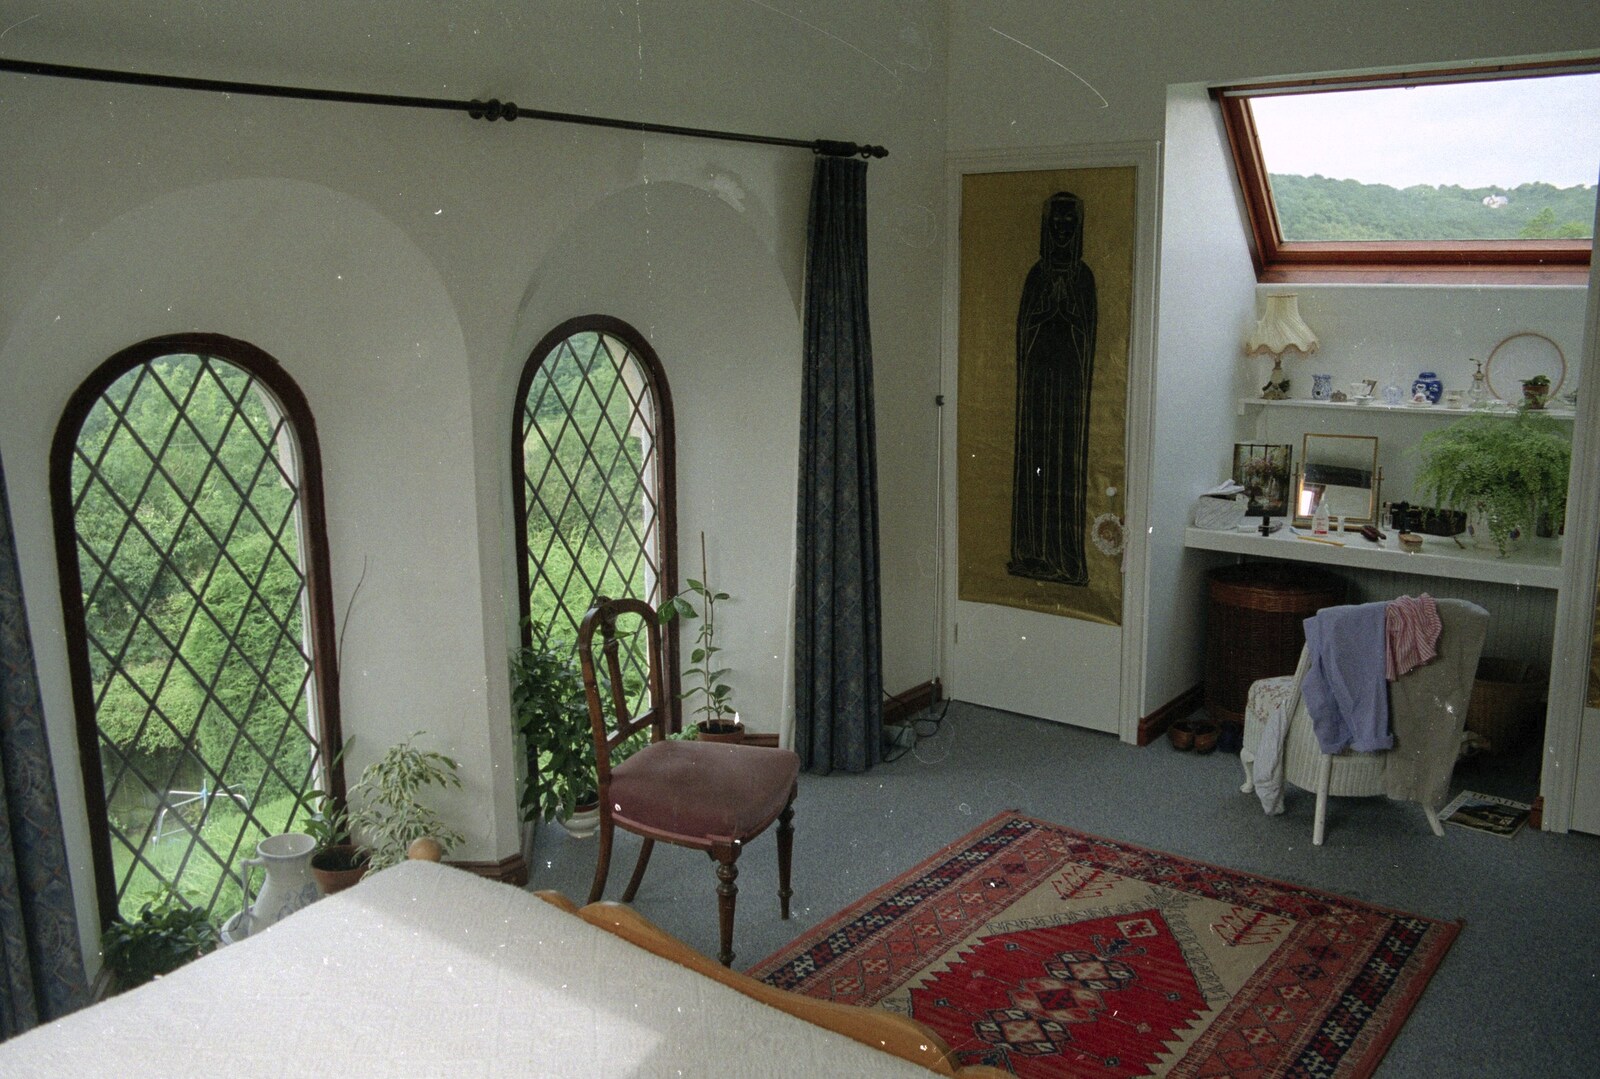 The master bedroom from Plymouth and The Chapel, Hoo Meavy, Devon - 25th July 1991